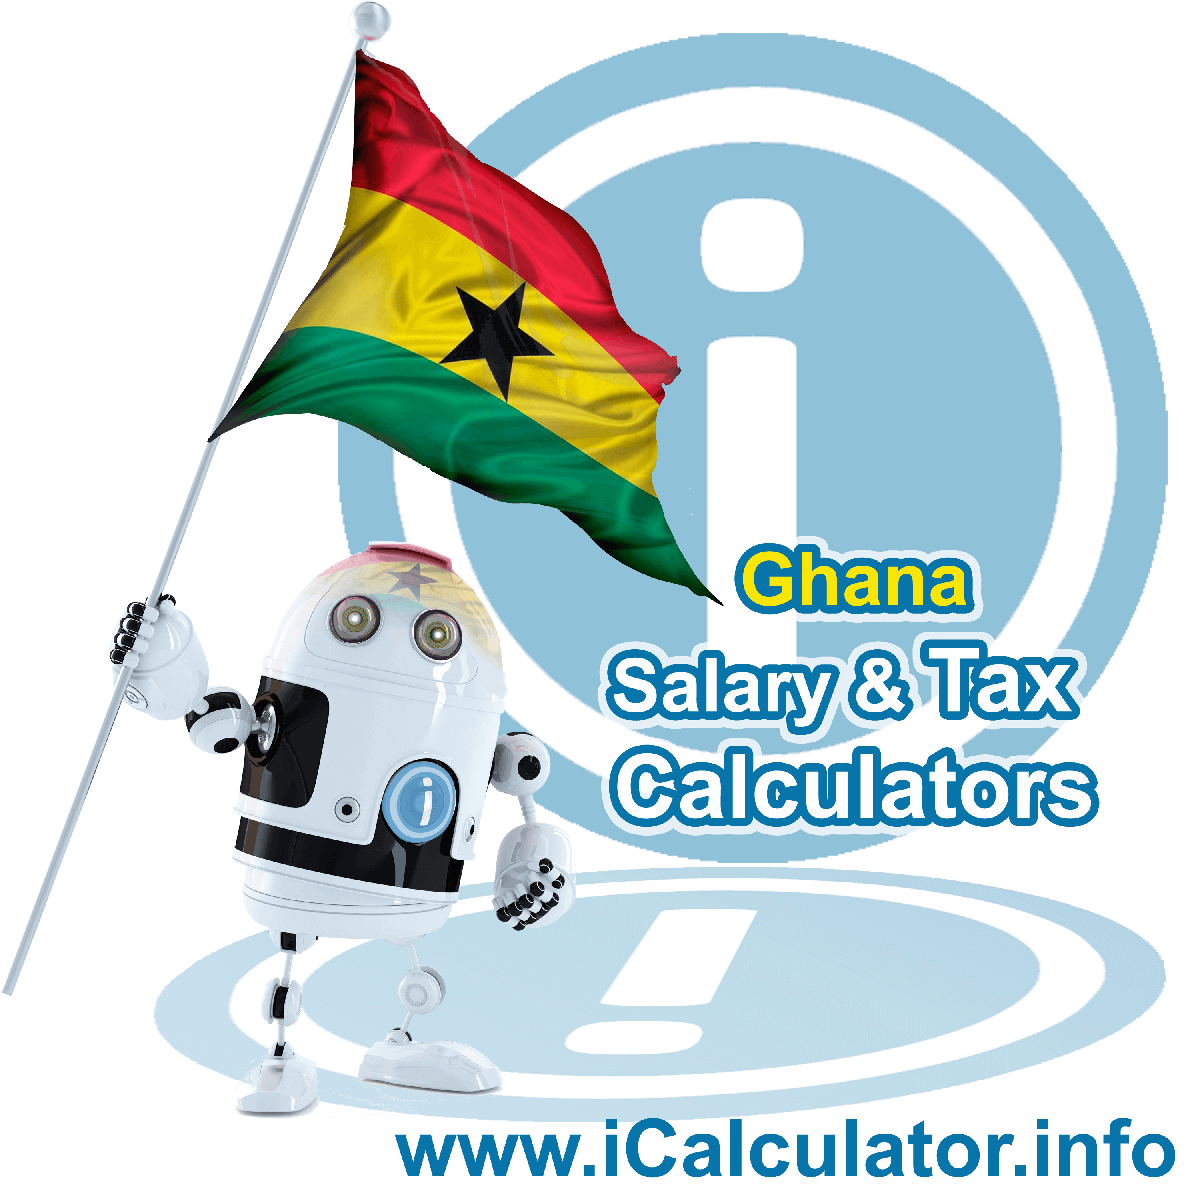 Ghana Tax Calculator. This image shows the Ghana flag and information relating to the tax formula for the Ghana Salary Calculator